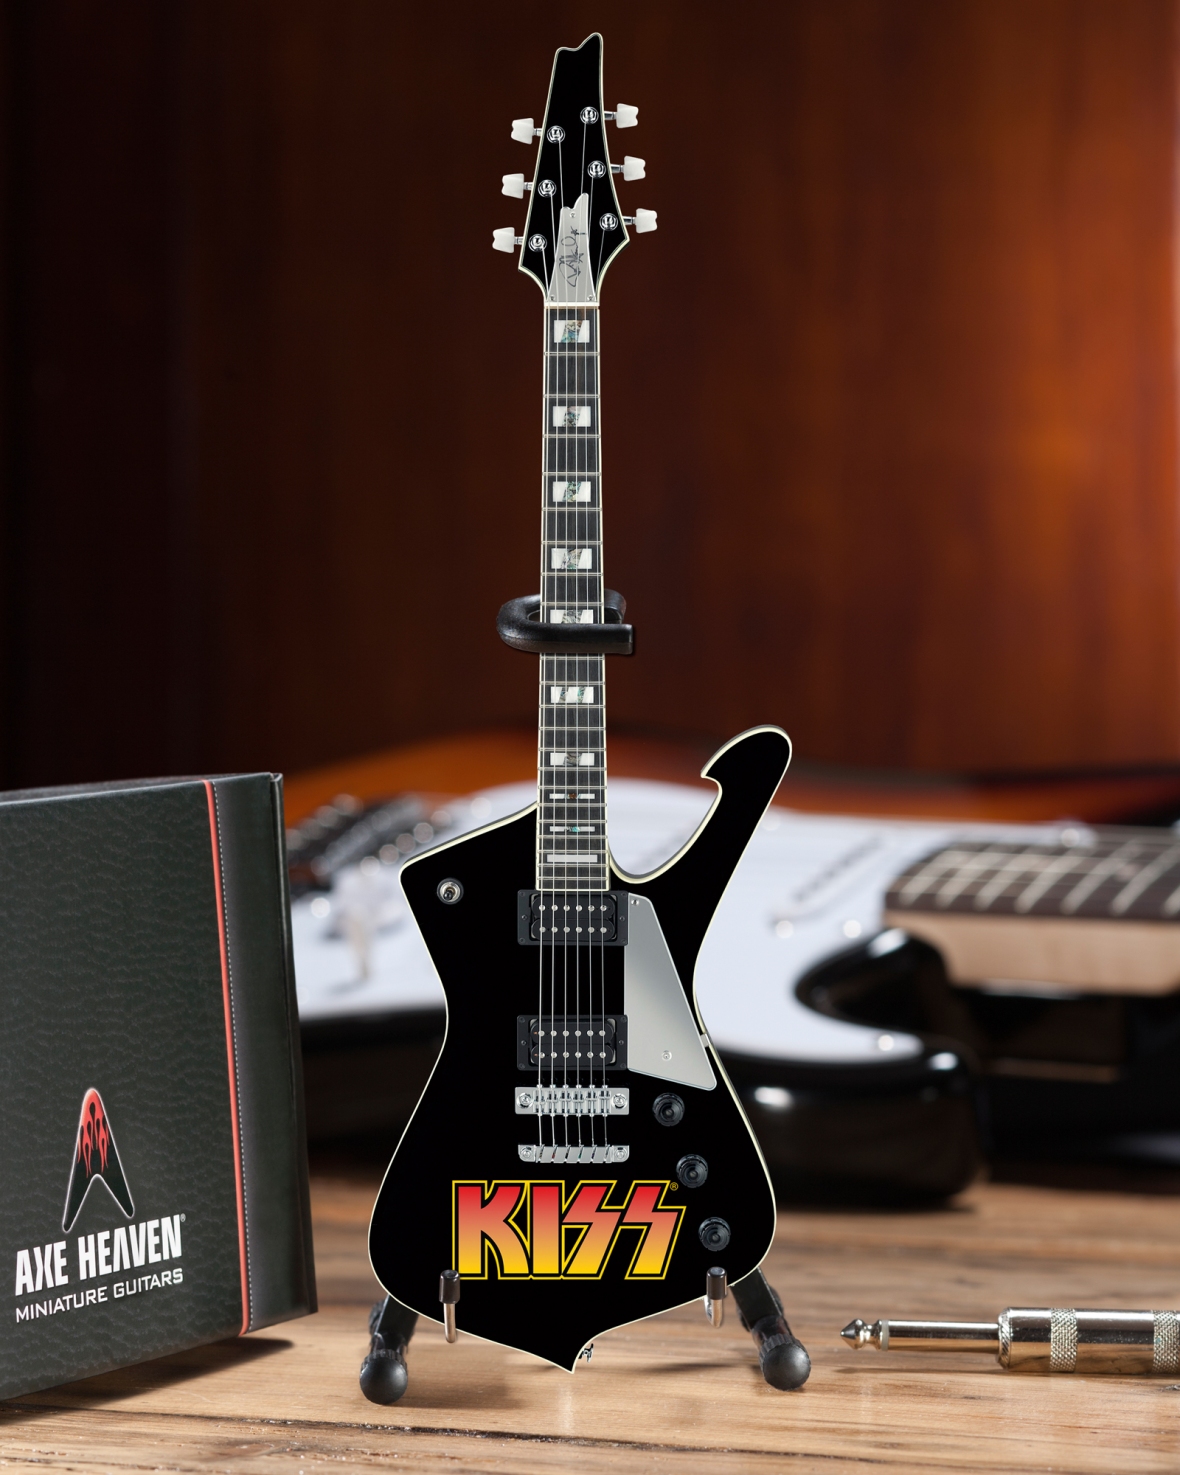 Officially Licensed KISS® Logo Paul Stanley Iceman Miniature Guitar Model by AXE HEAVEN® and ICON!C CONCEPTS®